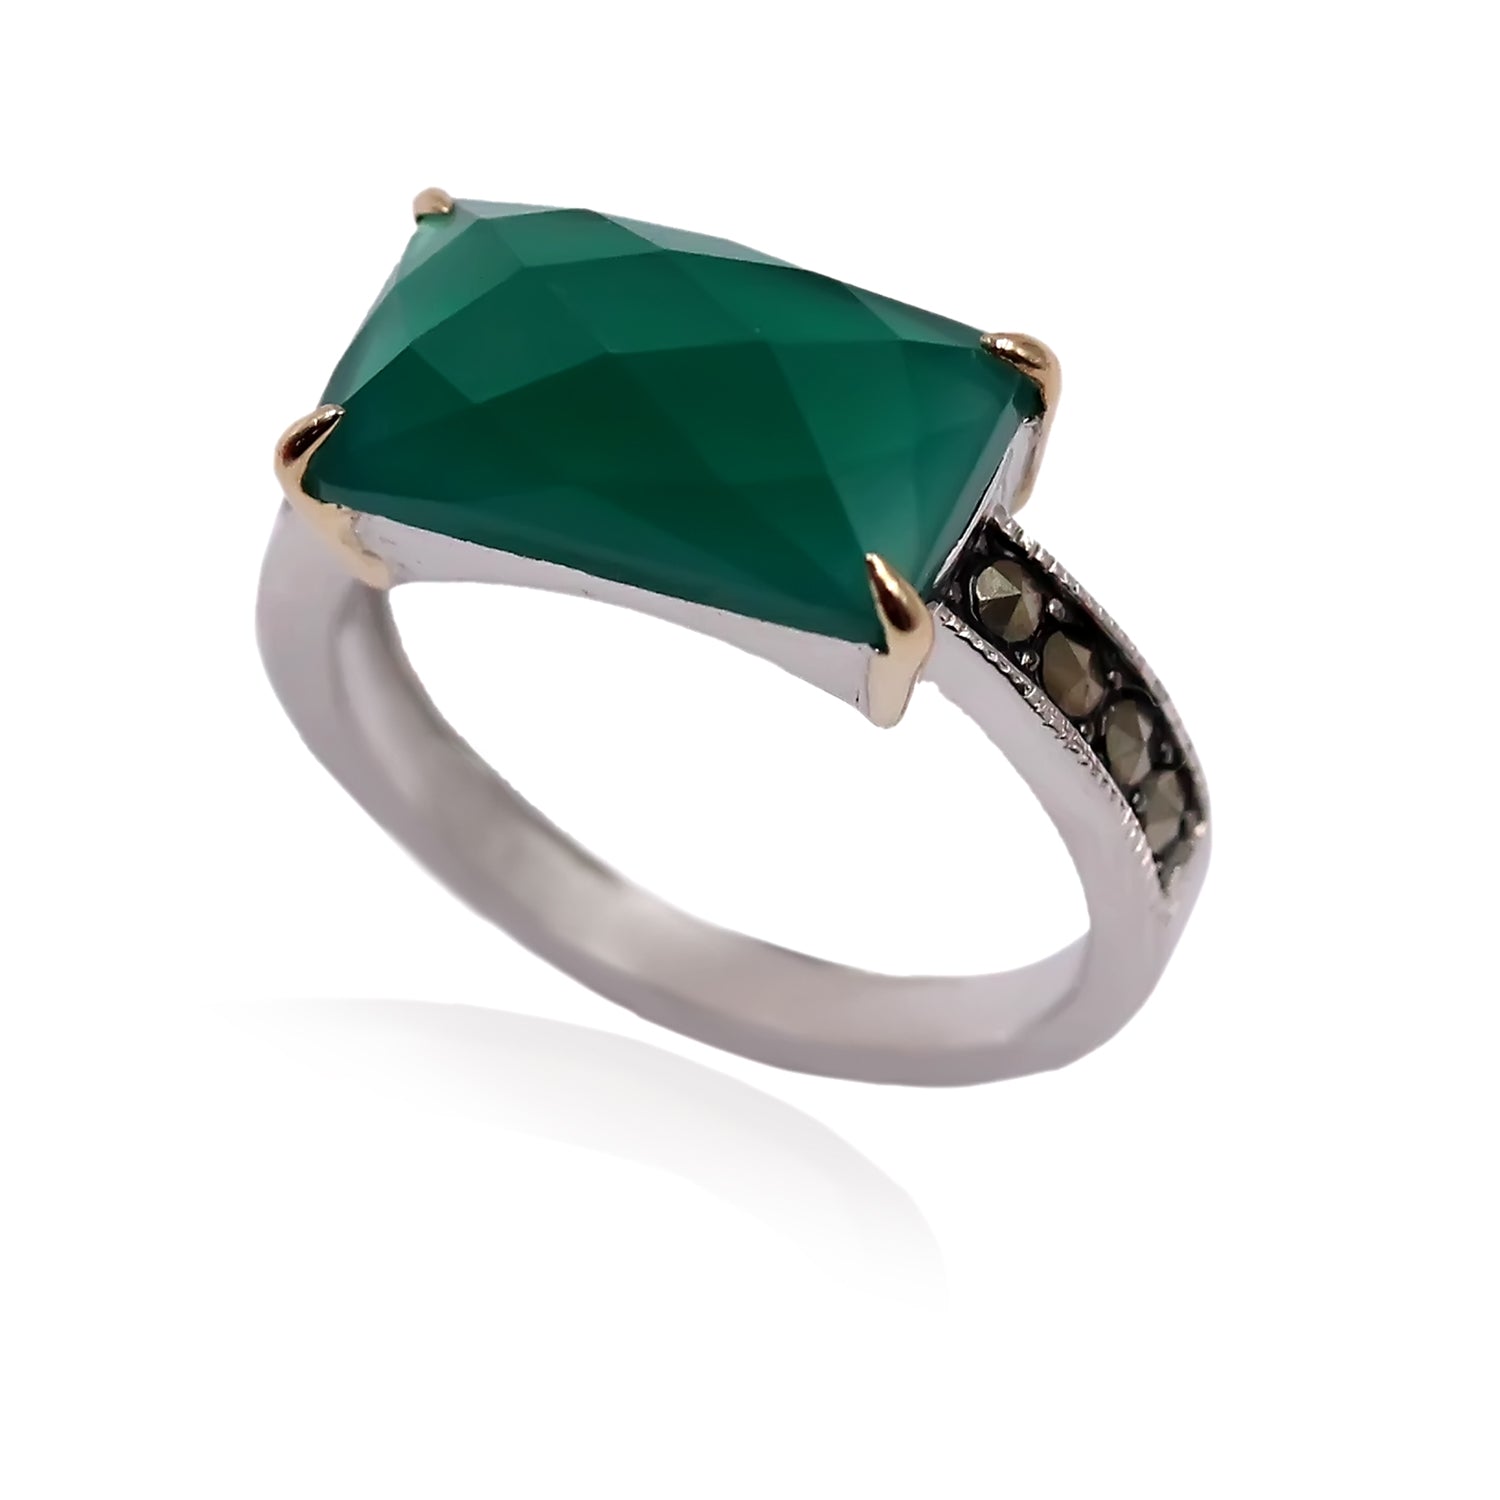 14K Gold & 925 Sterling Silver Marcasite, Green Agate Ring - Pinctore